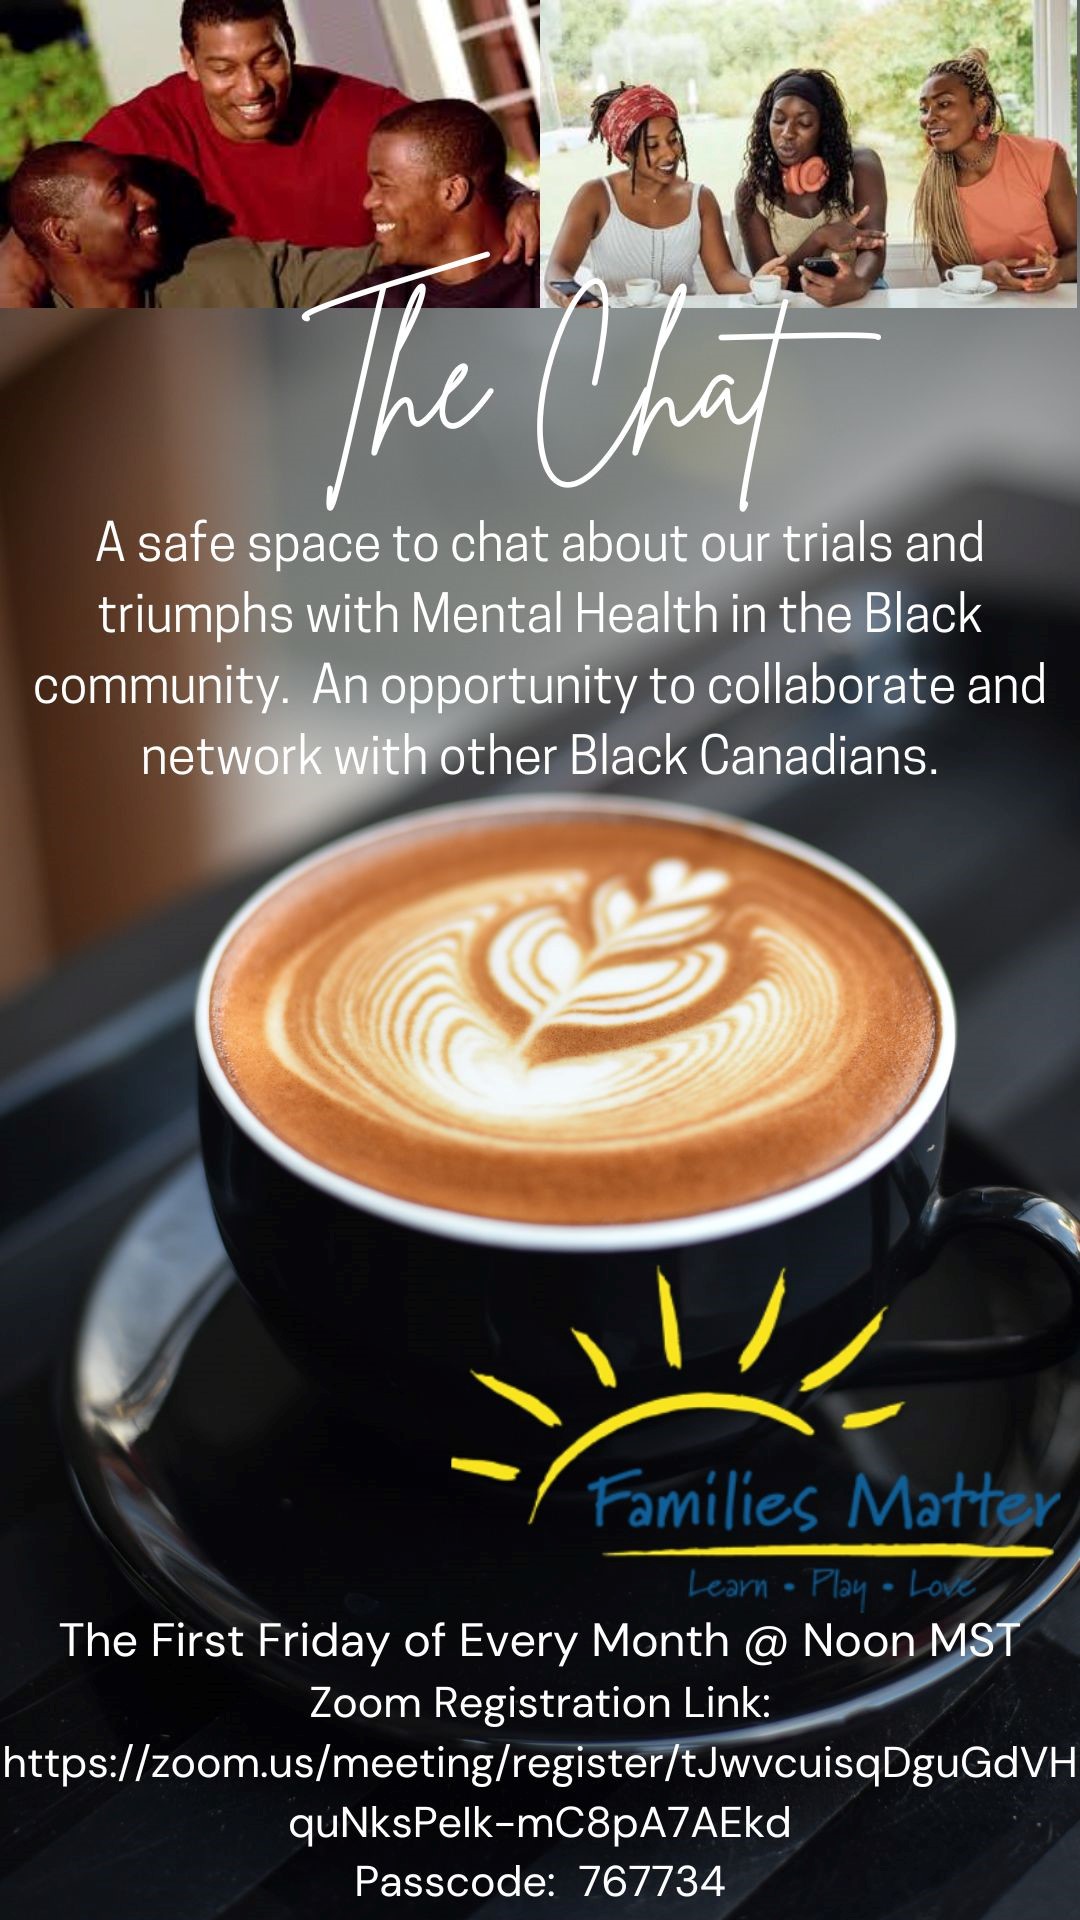 The Chat "A safe space to chat about our trials and triumphs with Mental Health in the Black community. An opportunity to collaborate and network with other Black Canadians. The First Friday of Every Month @ Noon MST" Click to Register; Passcode: 767734